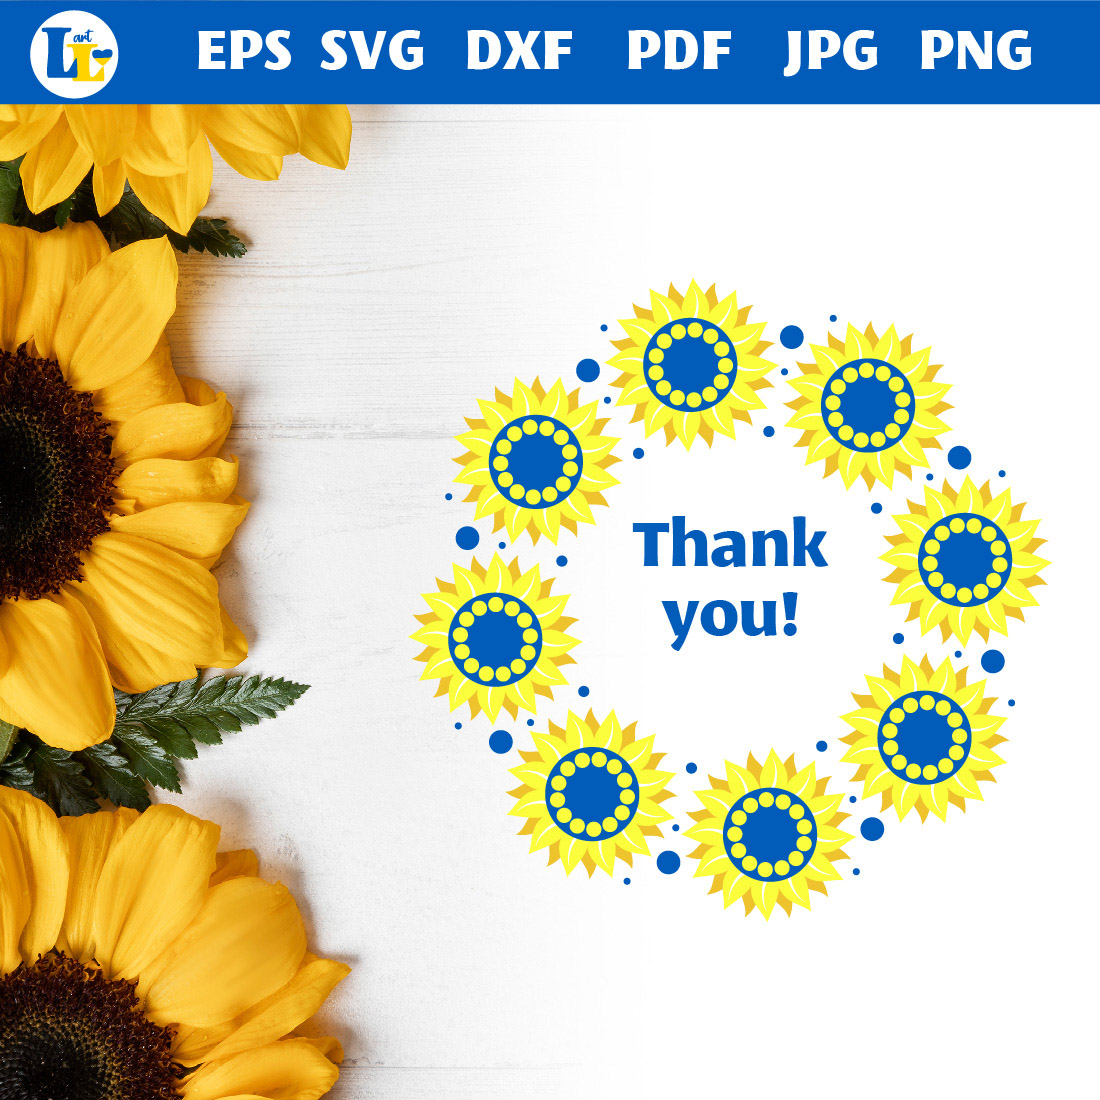 Round Frames with Yellow-Blue Birds and Sunflowers thank you.